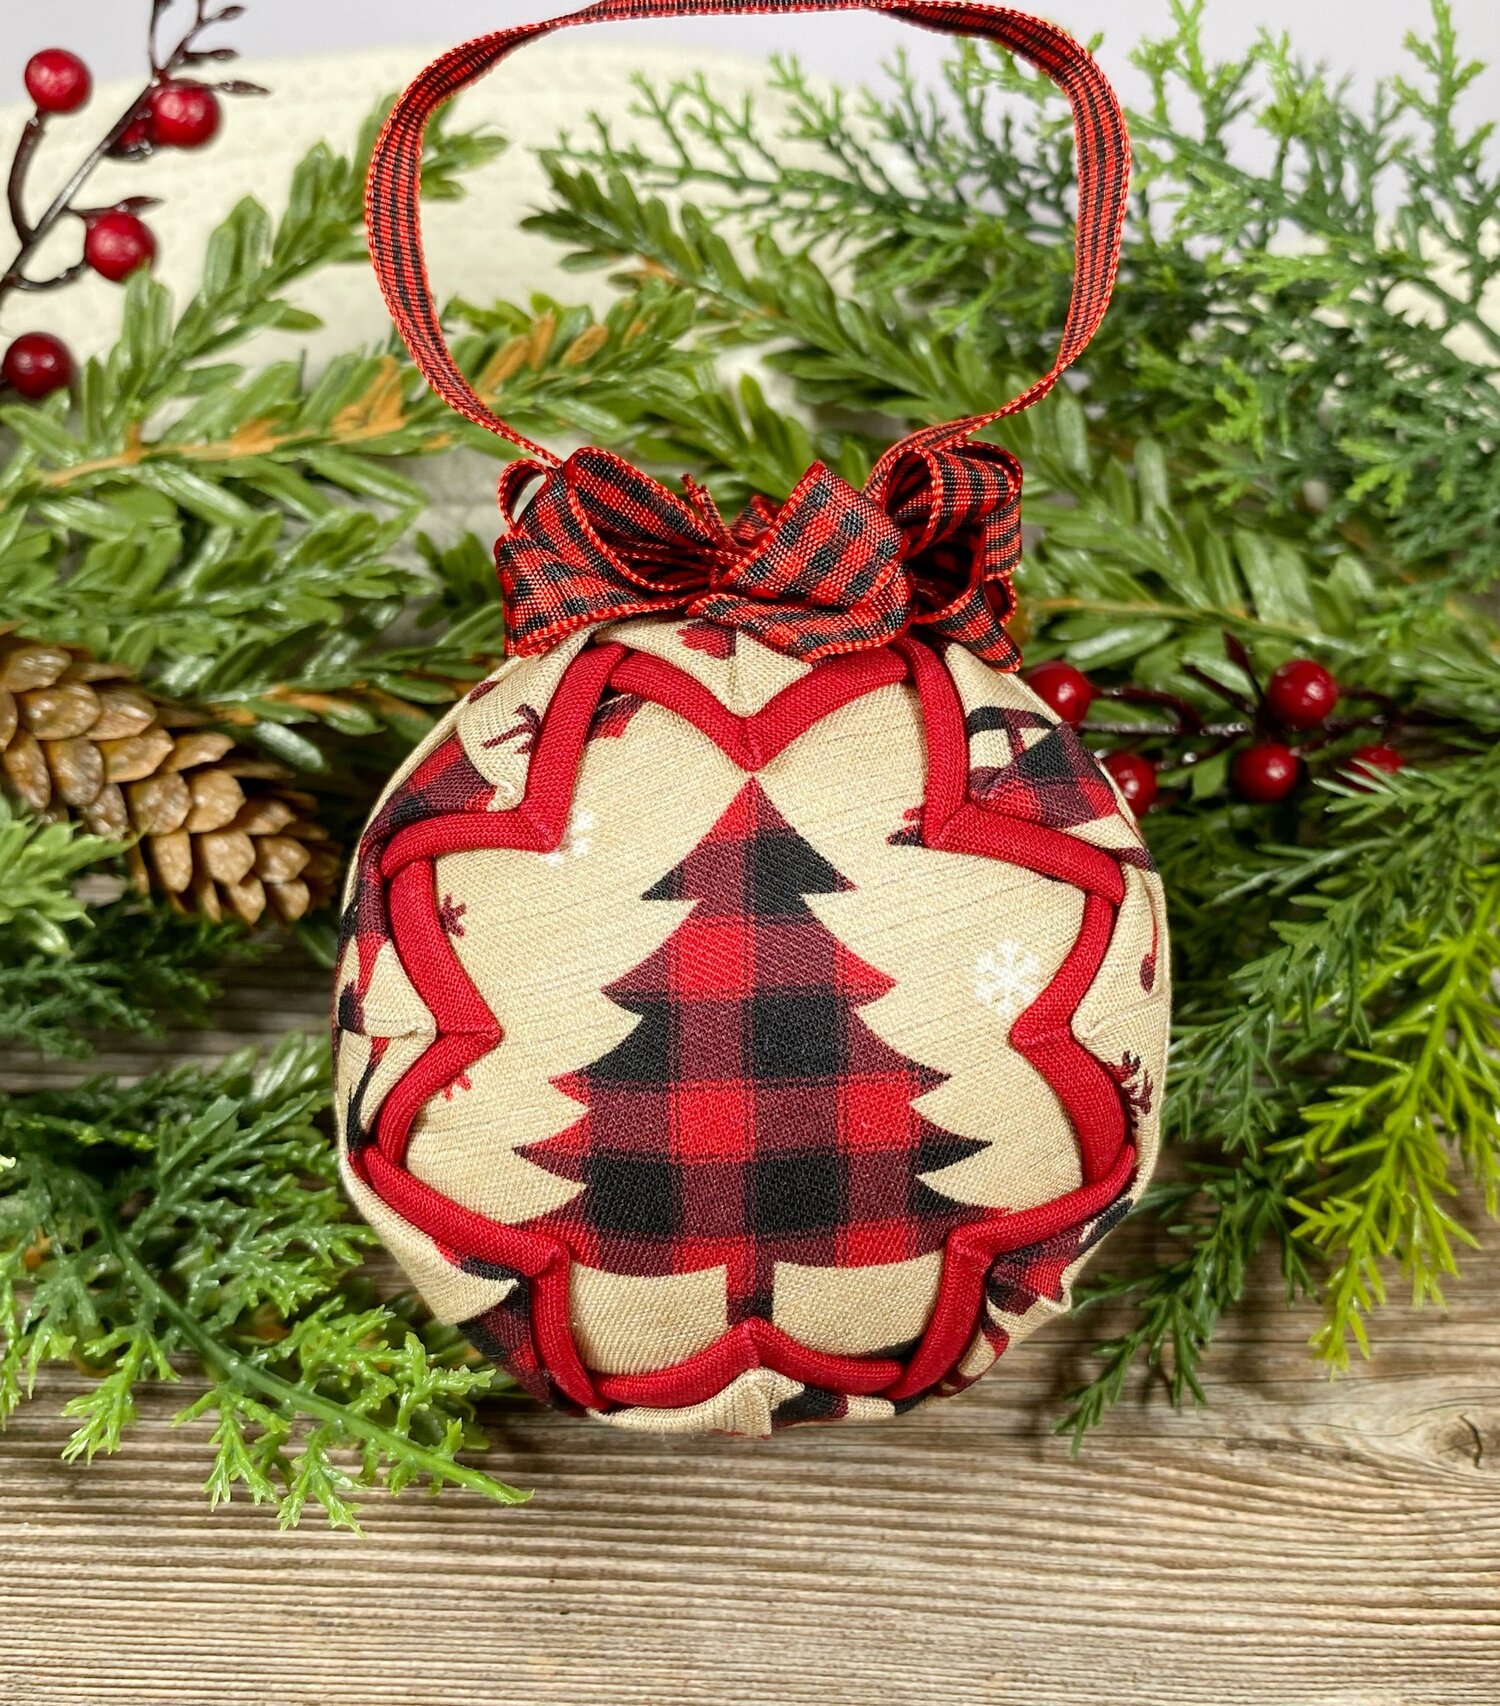 Buffalo plaid quilted Christmas ornament — The Ornament Boutique